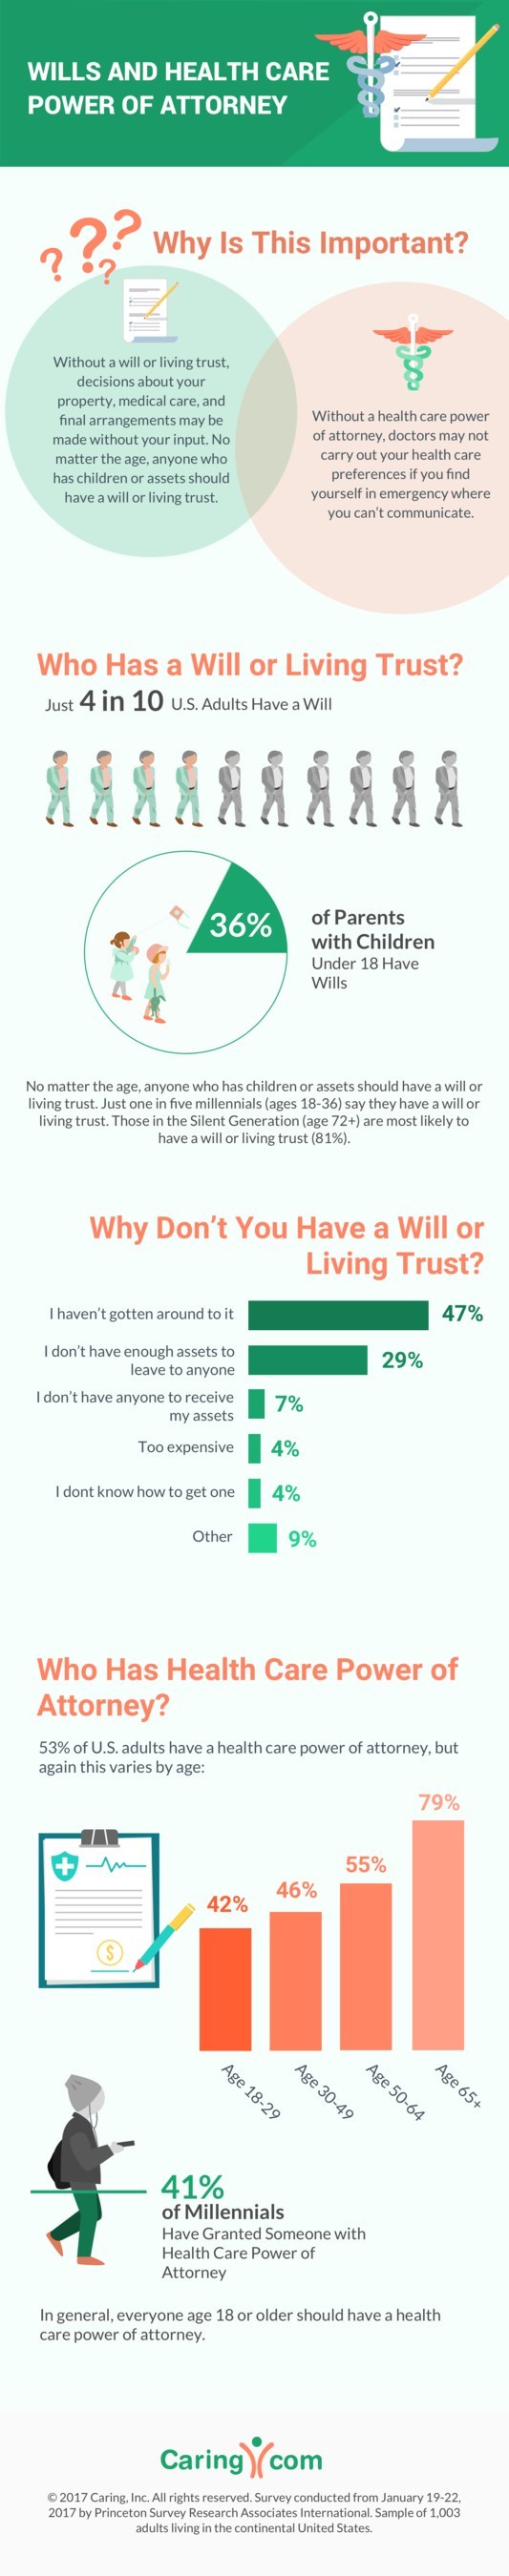 Nearly 6 in 10 U.S. Adults Don't Have a Will